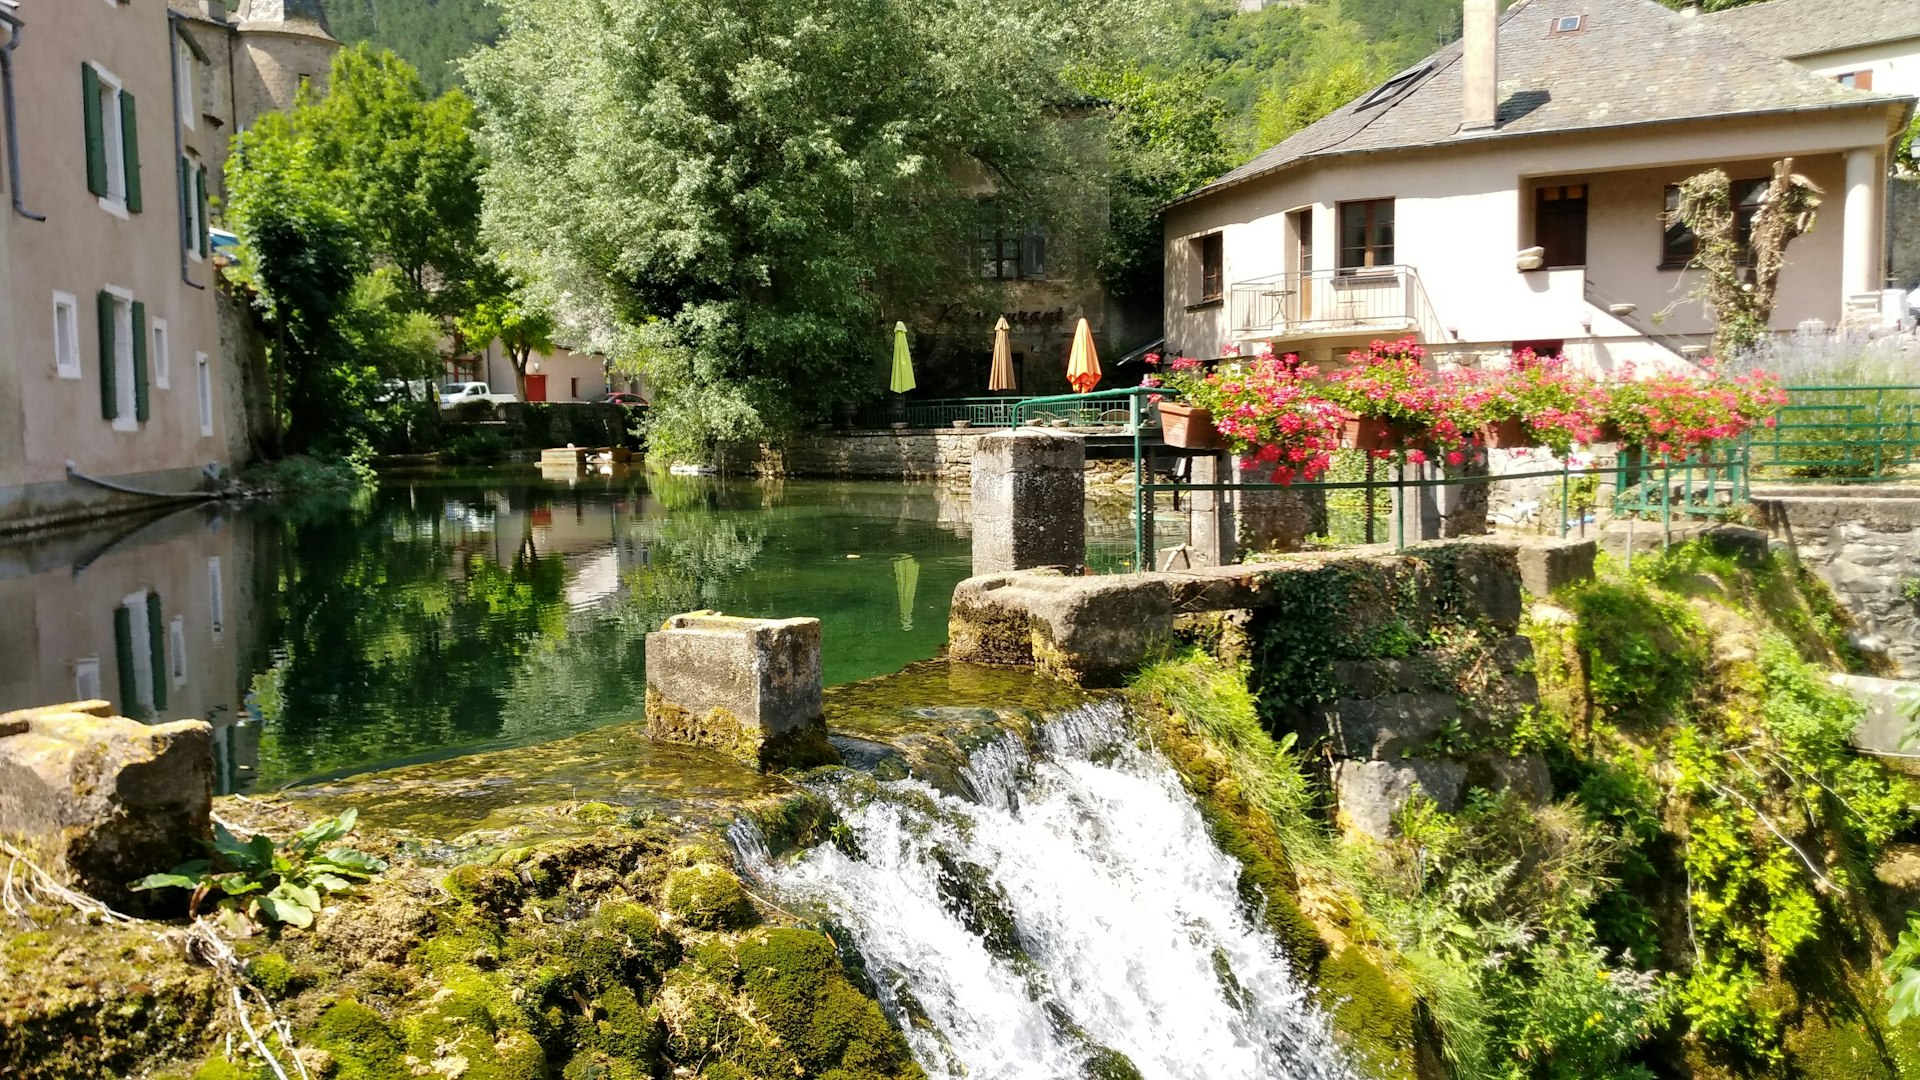 The river running through the village centre in Florac, France